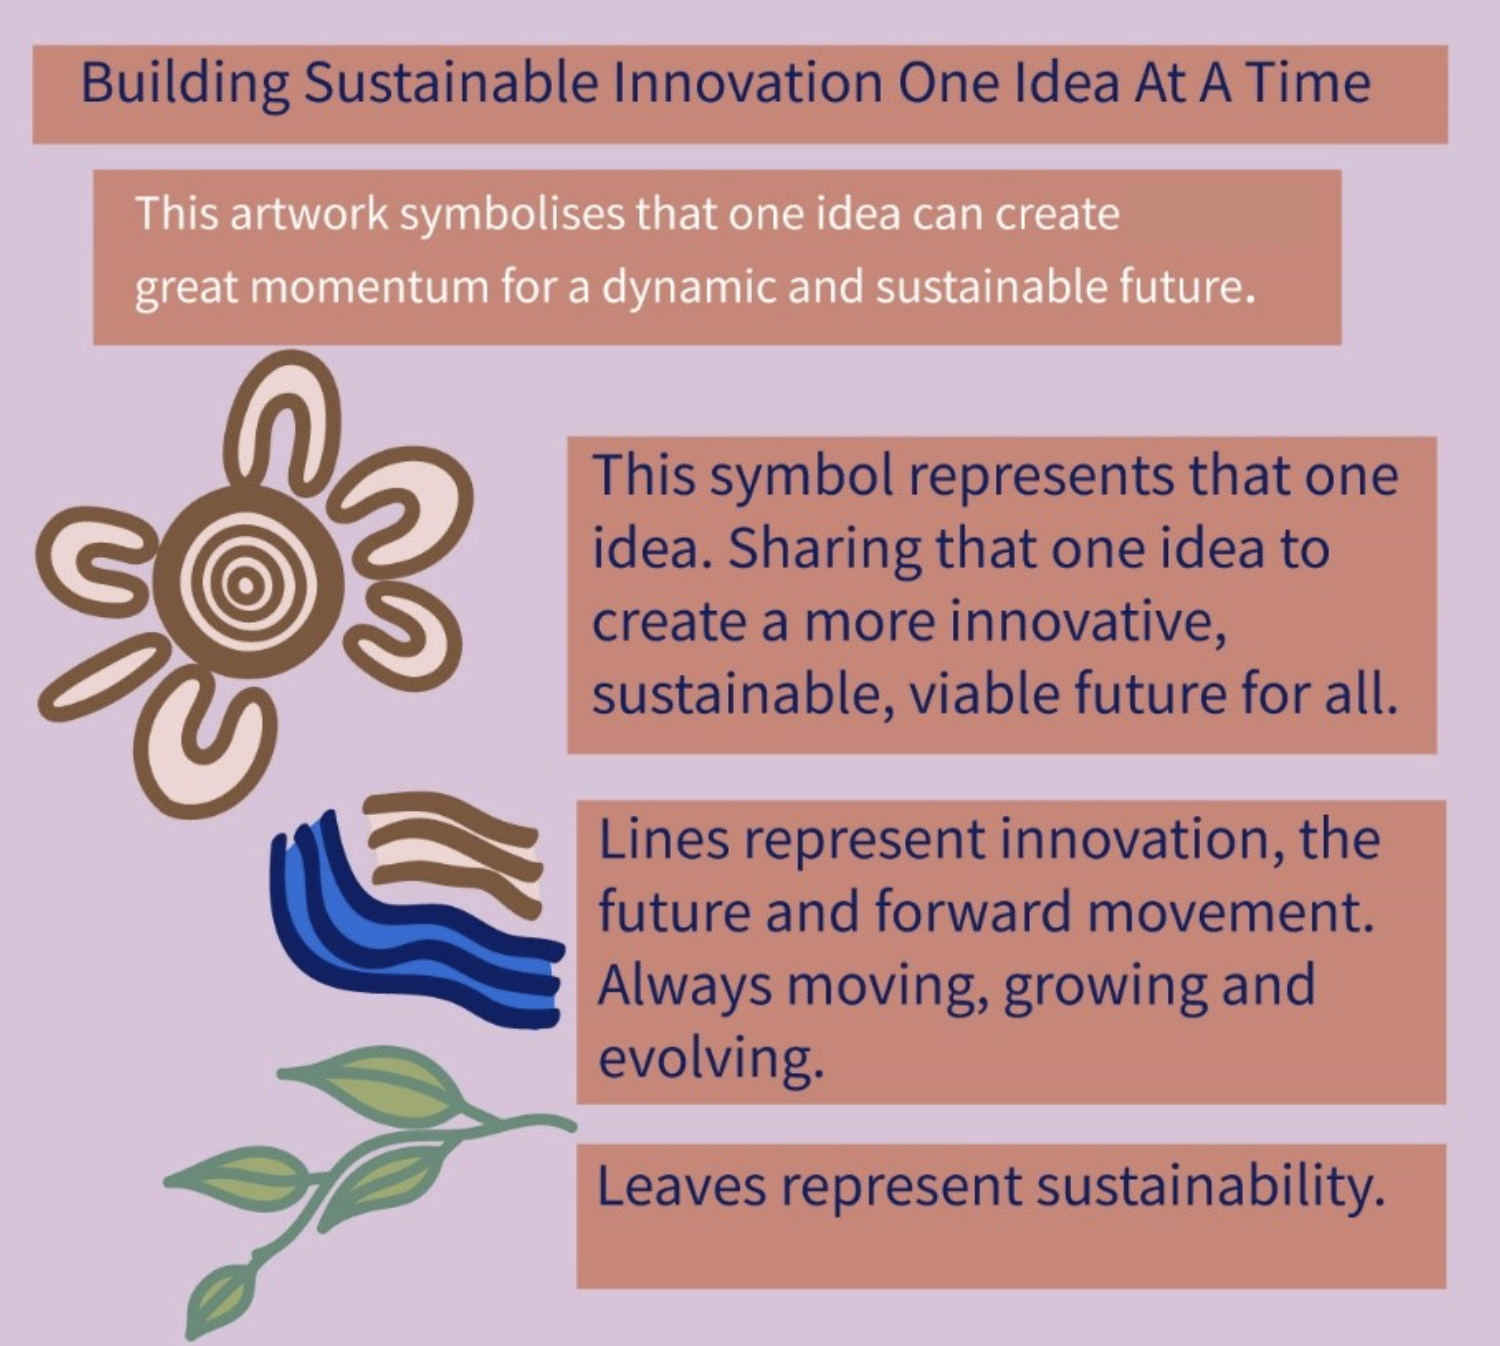 Building sustainable innovation one idea at a time. This artwork symbolises the idea that one idea can create great momentum for a dynamic and sustainable future. This symbol represents that one idea. Sharing that on idea to create a more innovative, sustainable, viable future for all. Lines represent innovation, the future and forward movement. Always moving, growing and evolving. Leaves represent sustainability.